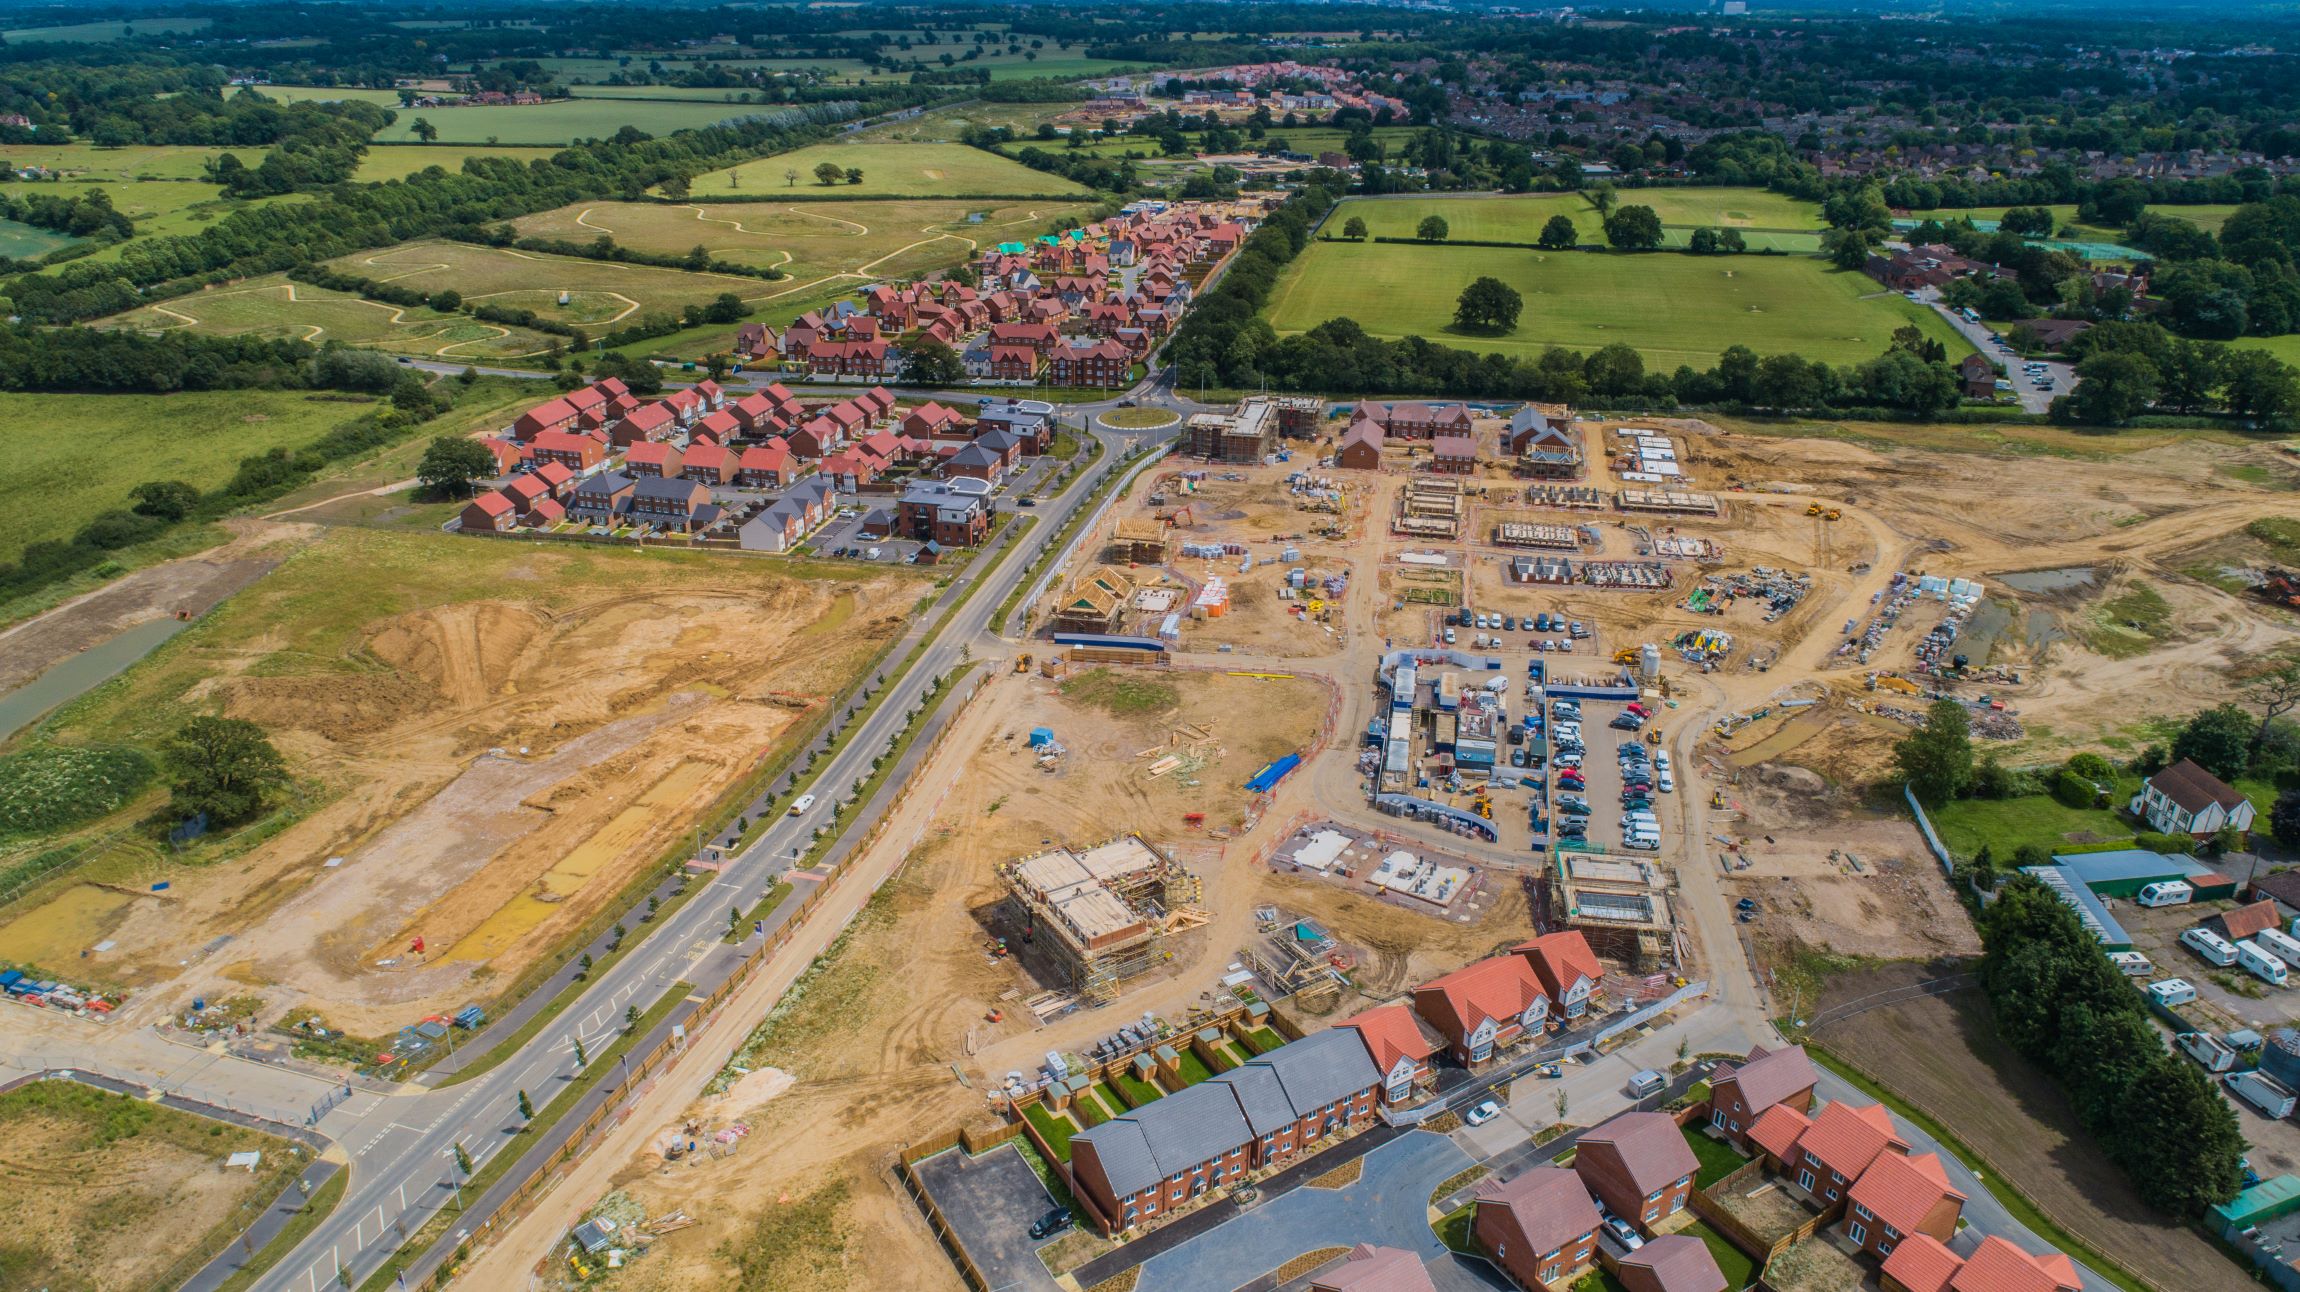 Aerial view of a large housing development construction site in the country side.